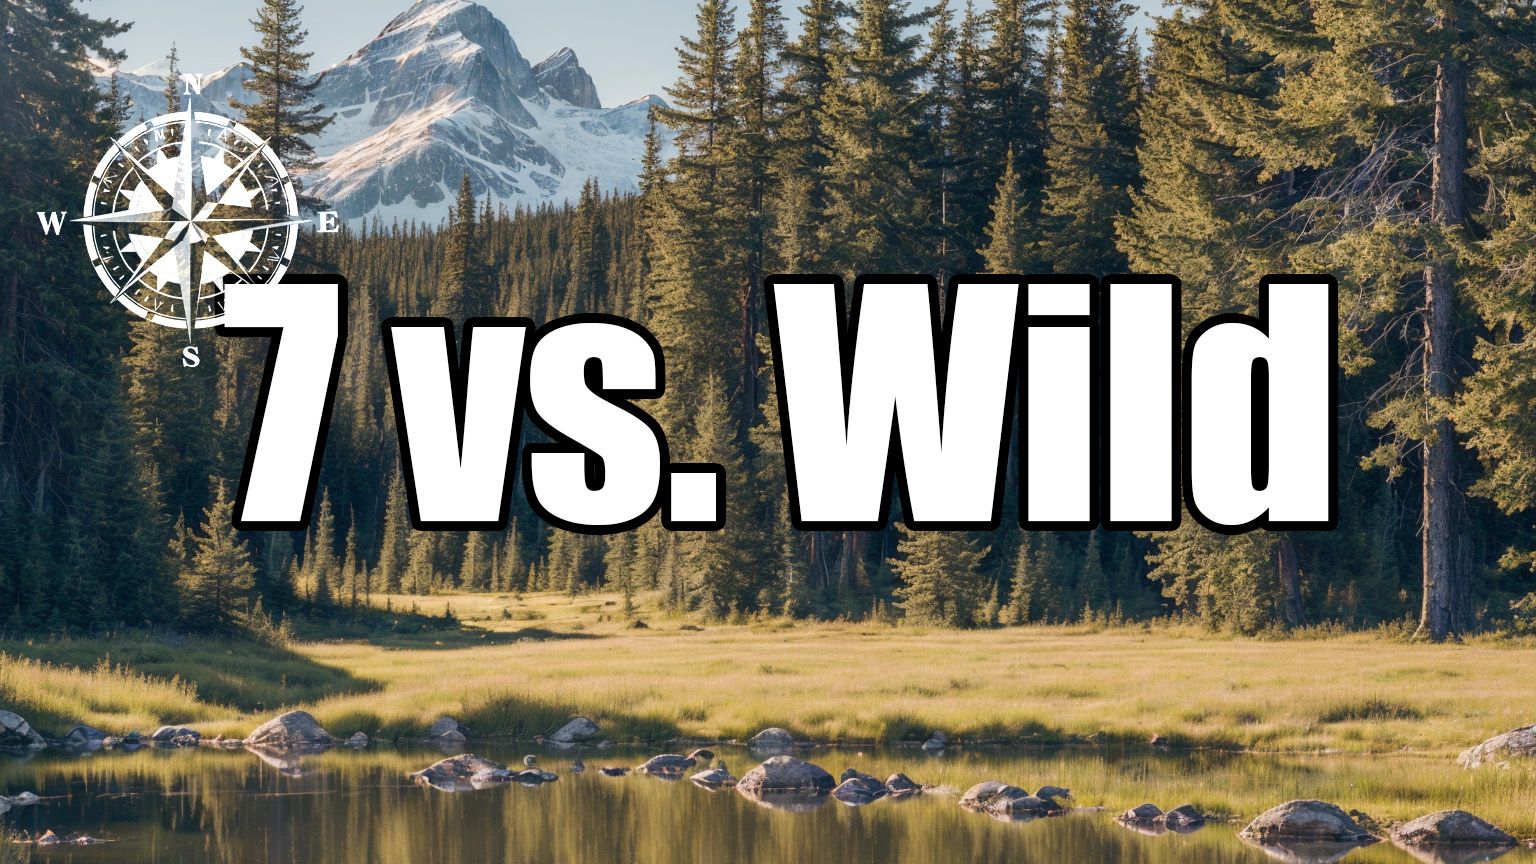 7 vs. Wild: Fritz Meinecke's statement on the incident at 7 vs. Wild